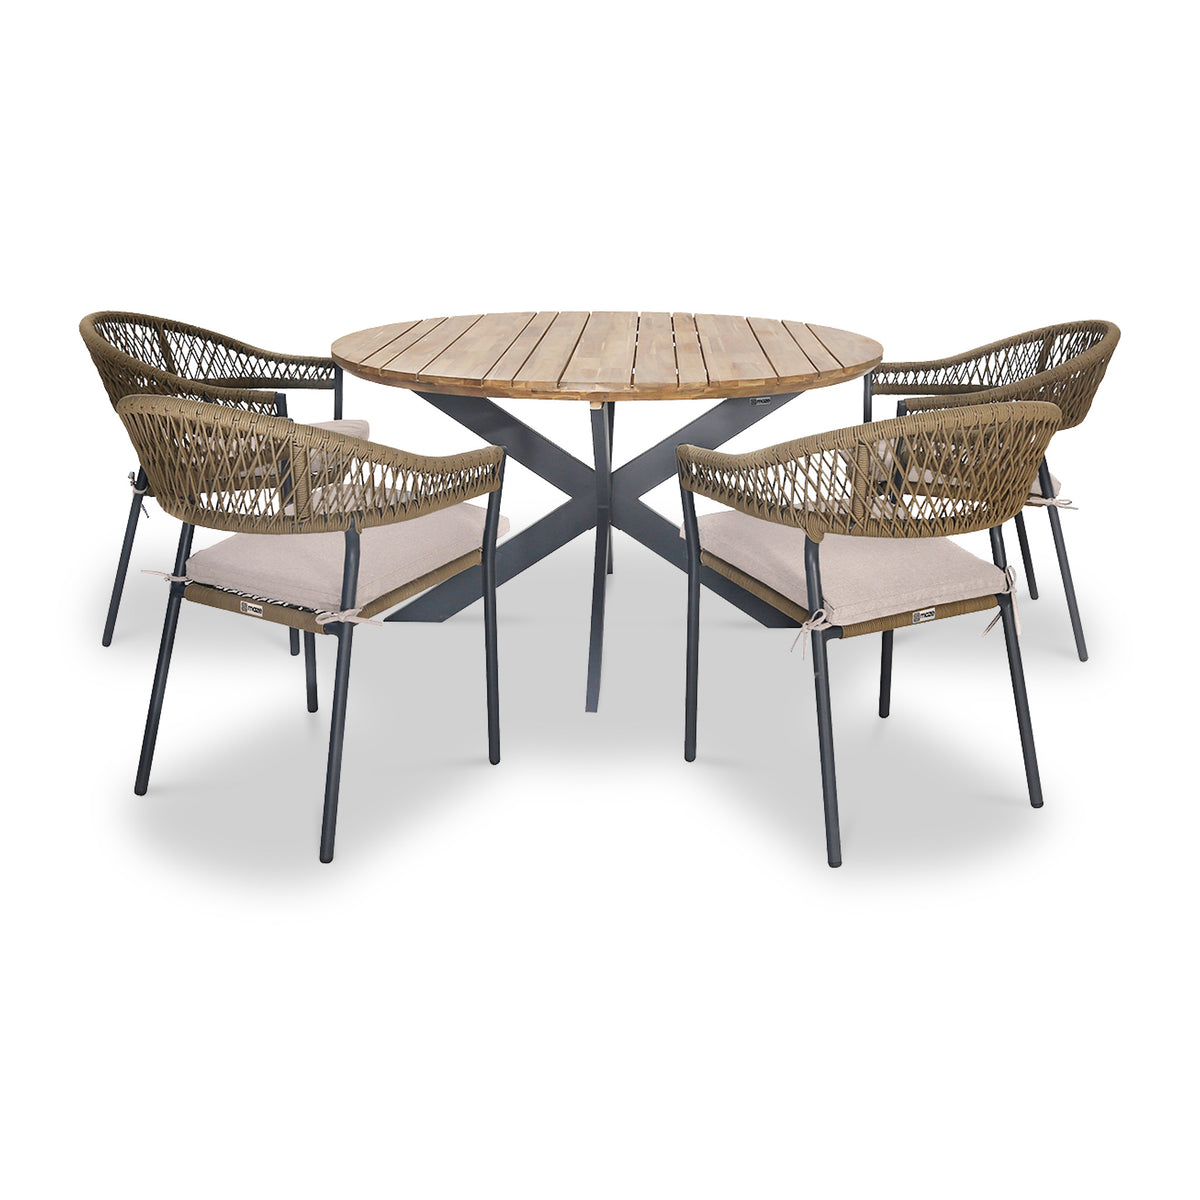 Maze Bali 4 Seat 140cm Round Outdoor Dining Set from Roseland Furniture